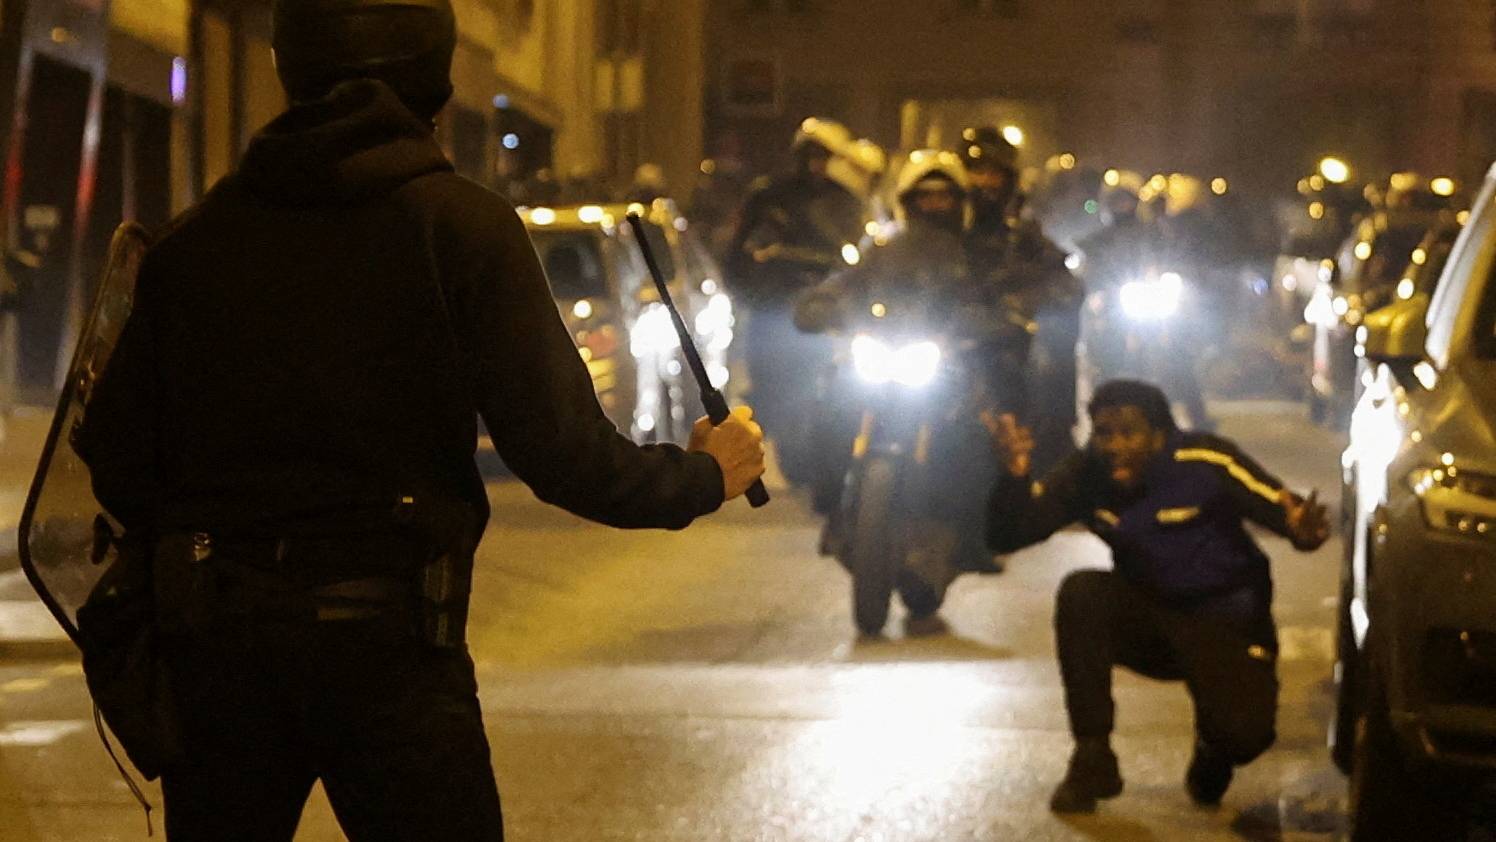 A police officer threatens a protester with a baton during protests in Paris. /Nacho Doce/Reuters